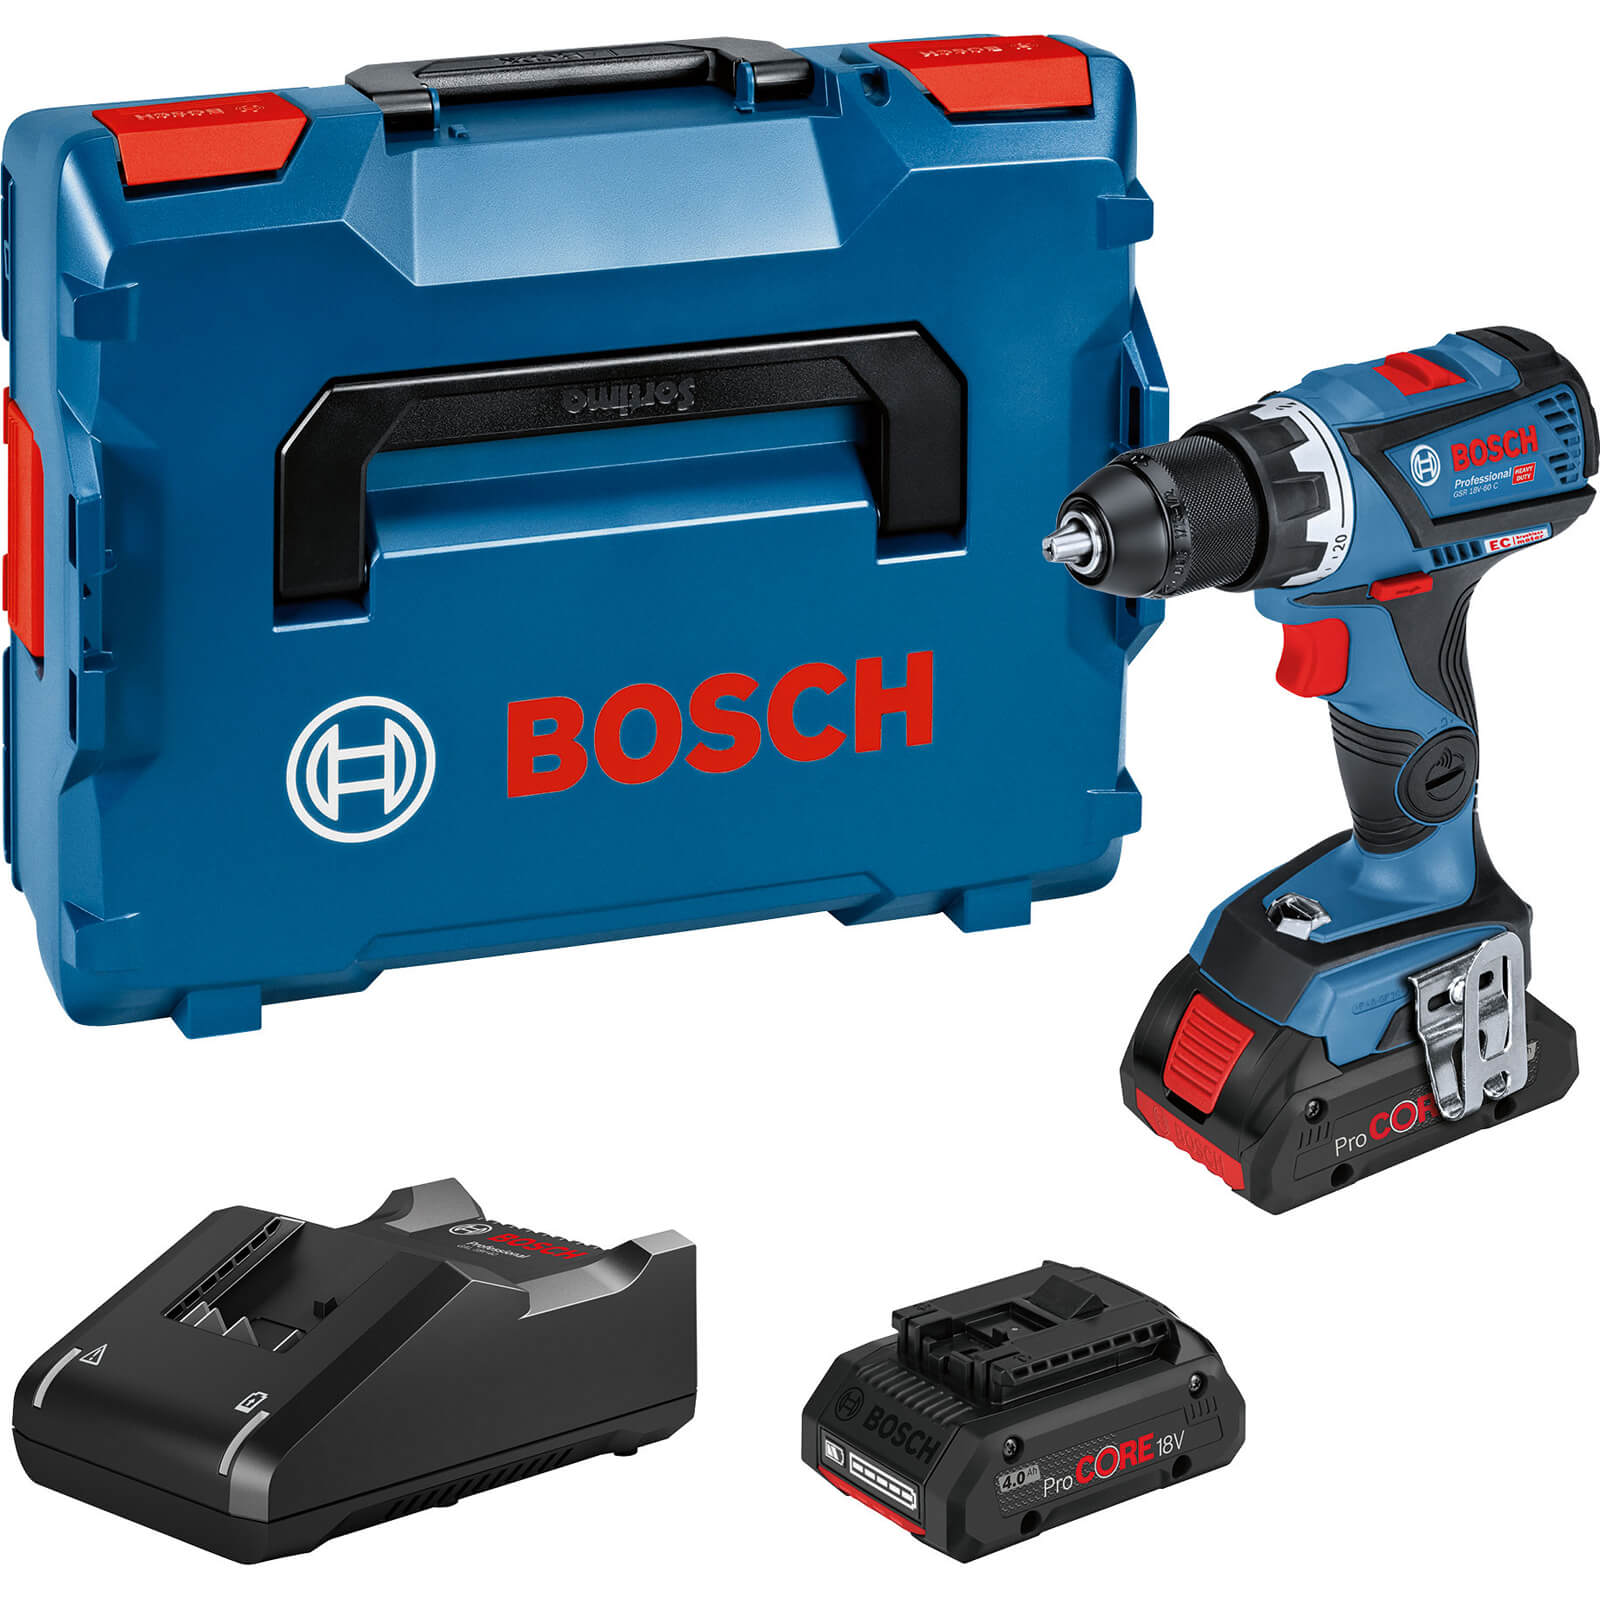 Image of Bosch GSR 18 V-60 C 18v Cordless Connect Ready Drill Driver 2 x 4ah Li-ion ProCore Charger Case